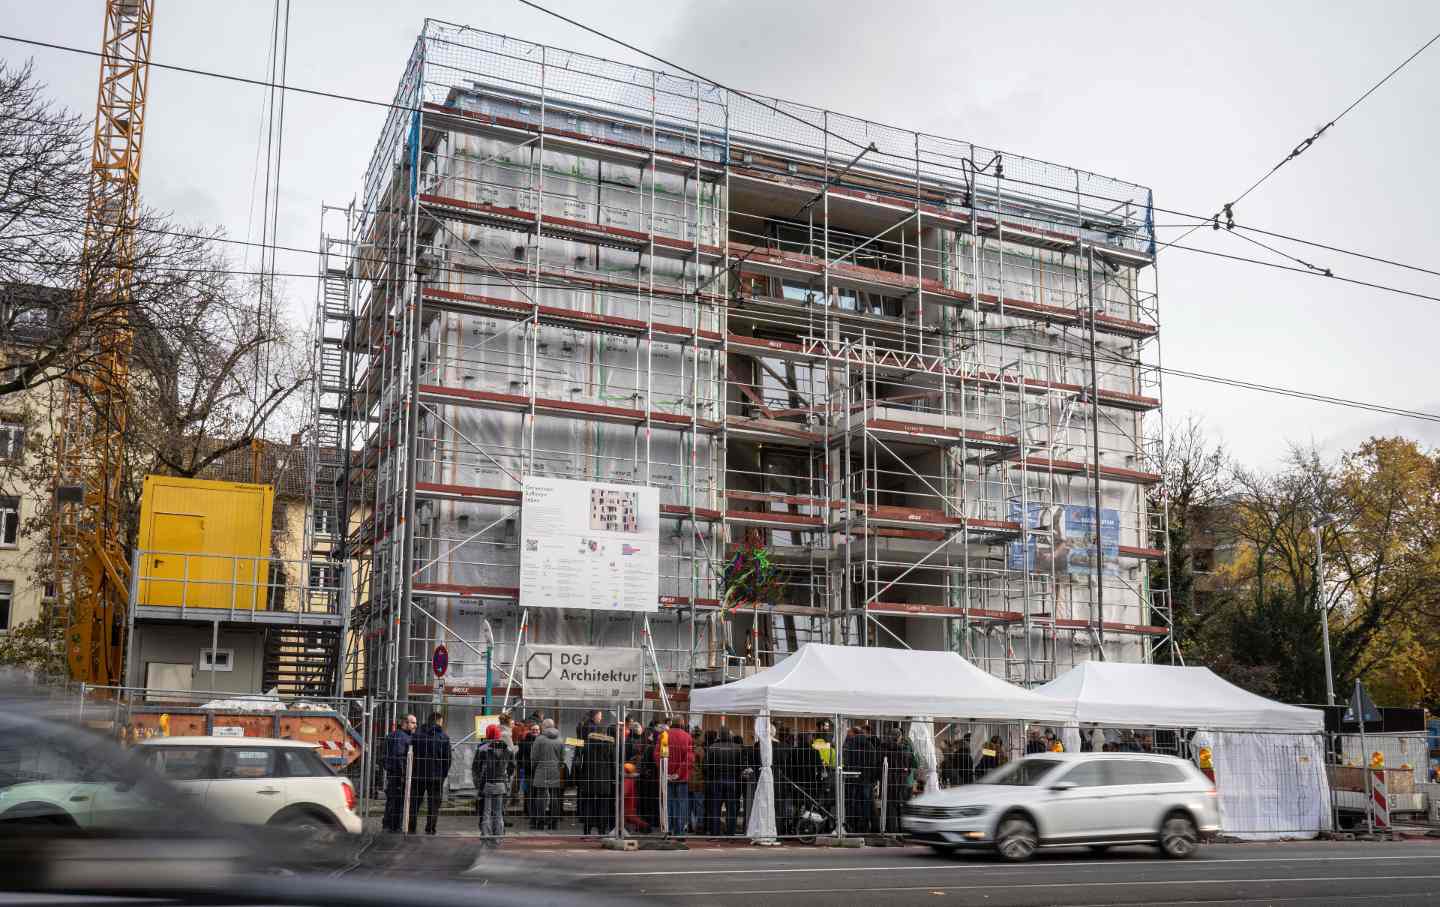 Visitors, employees, and future residents stand at the topping-out ceremony for a residential building in Frankfurt, Germany.